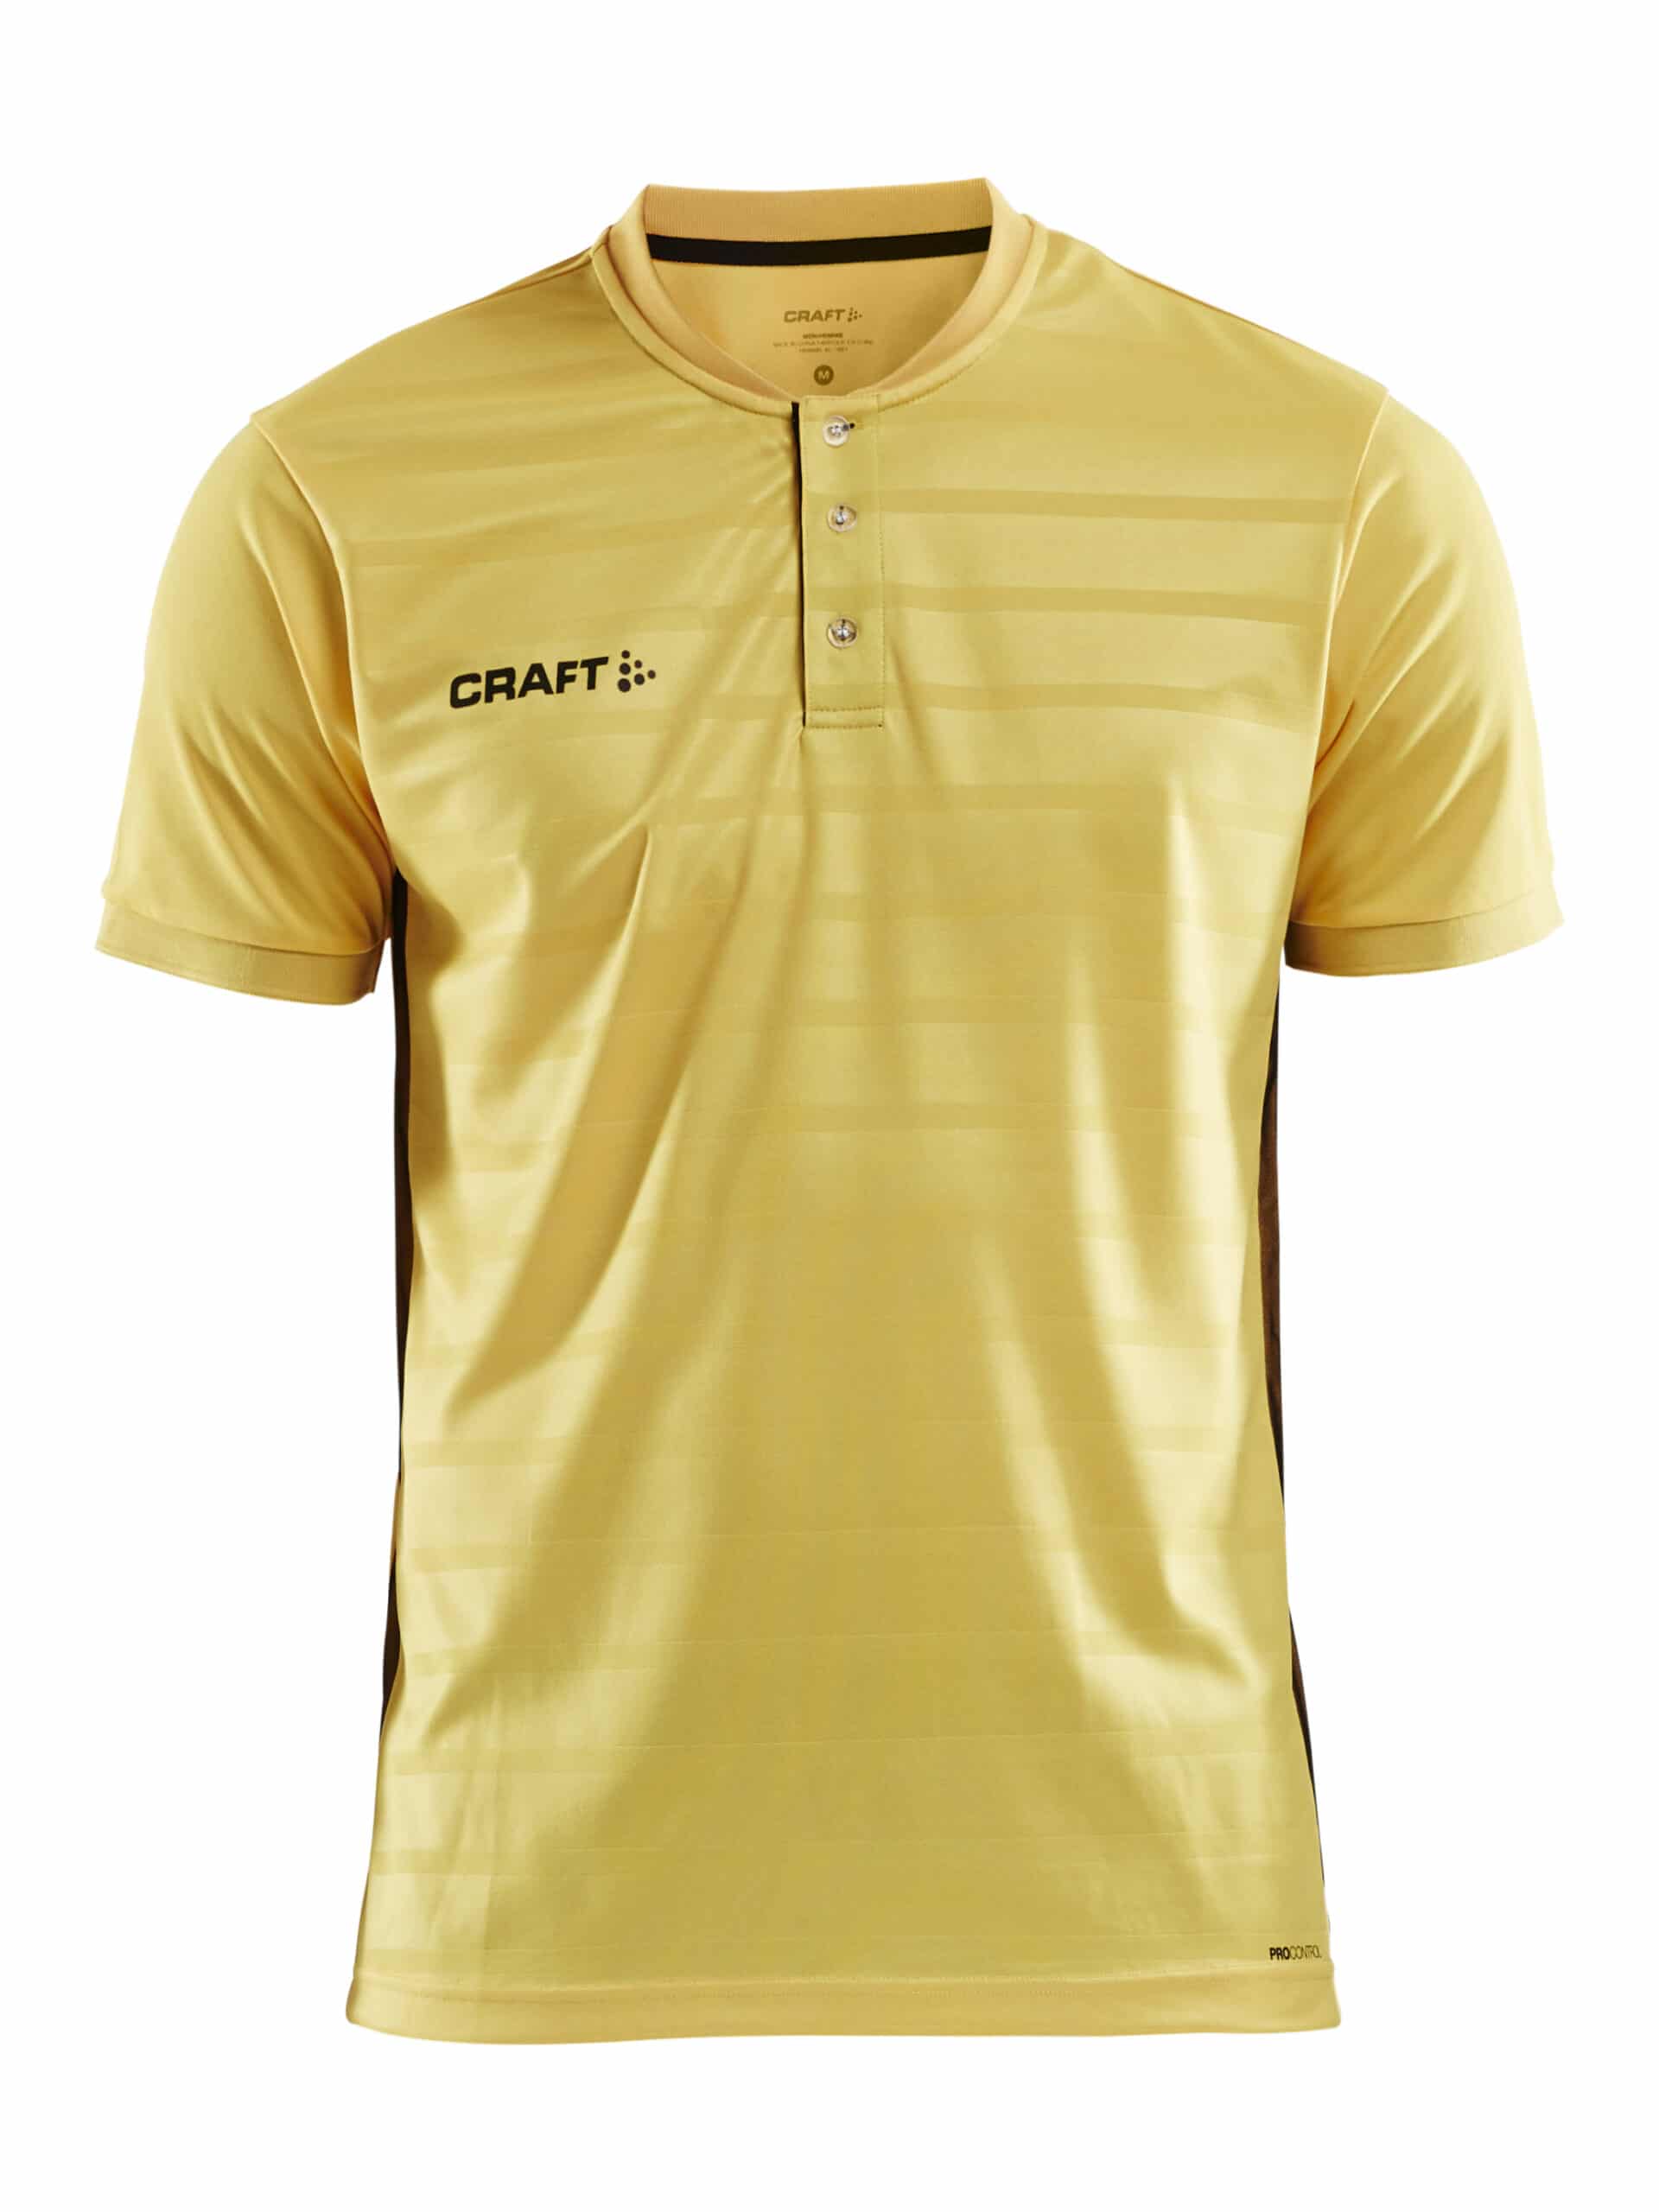 Craft - Pro Control Button Jersey Maend - Sweden Yellow/Black S